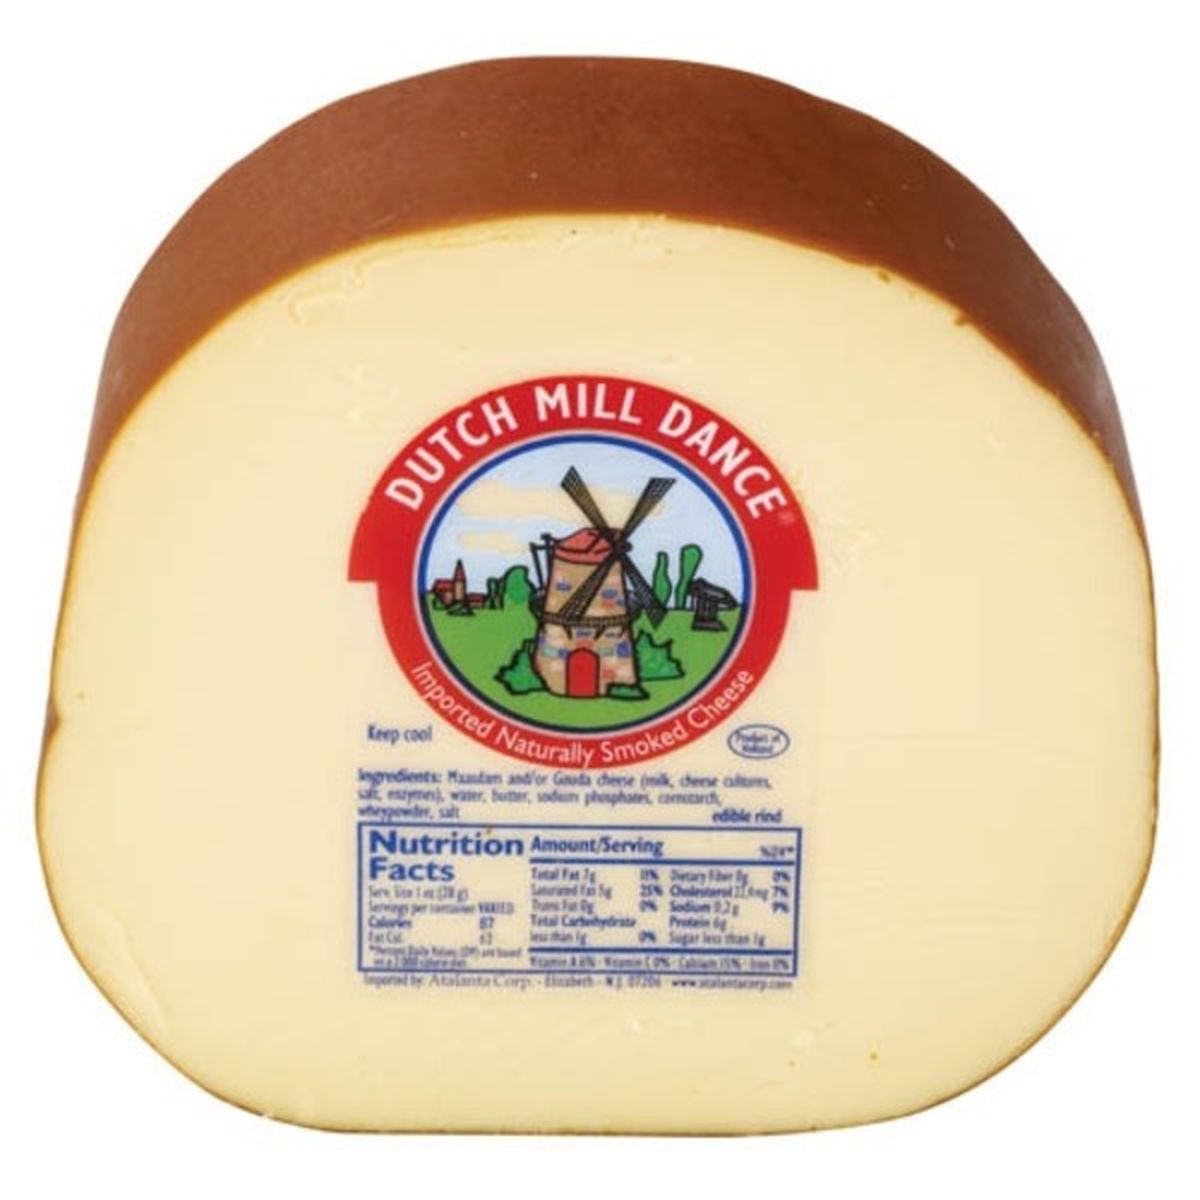 Calories in Dutch Mill Dance Smoked Gouda Cheese